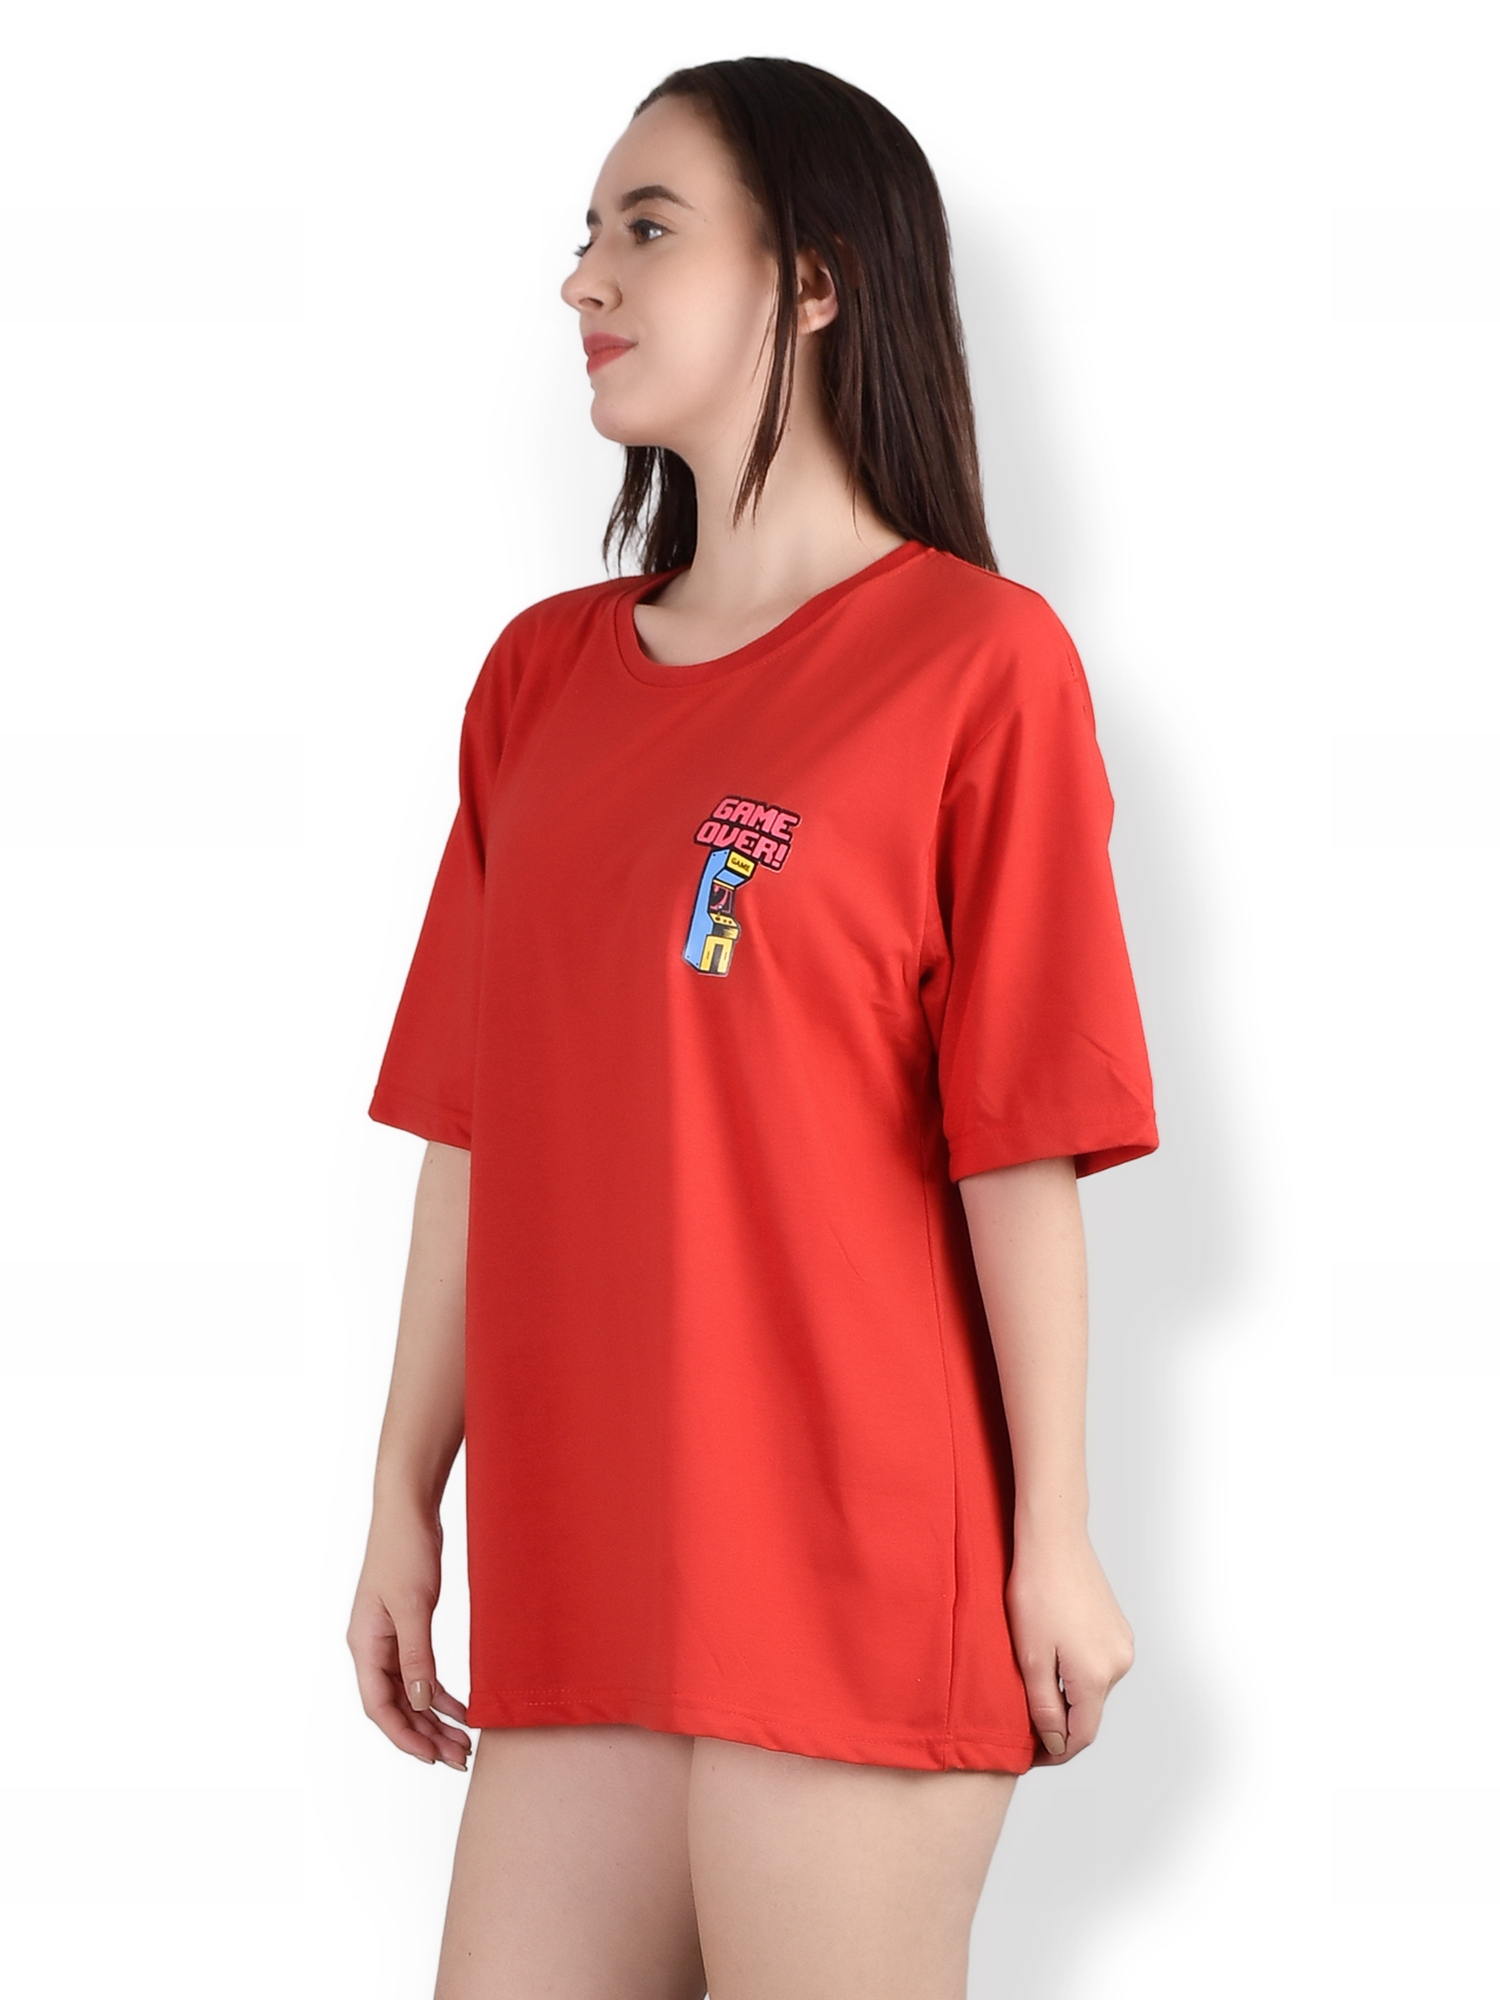 Game Over : Quirky Printed Oversized Women's Tees In Red Color